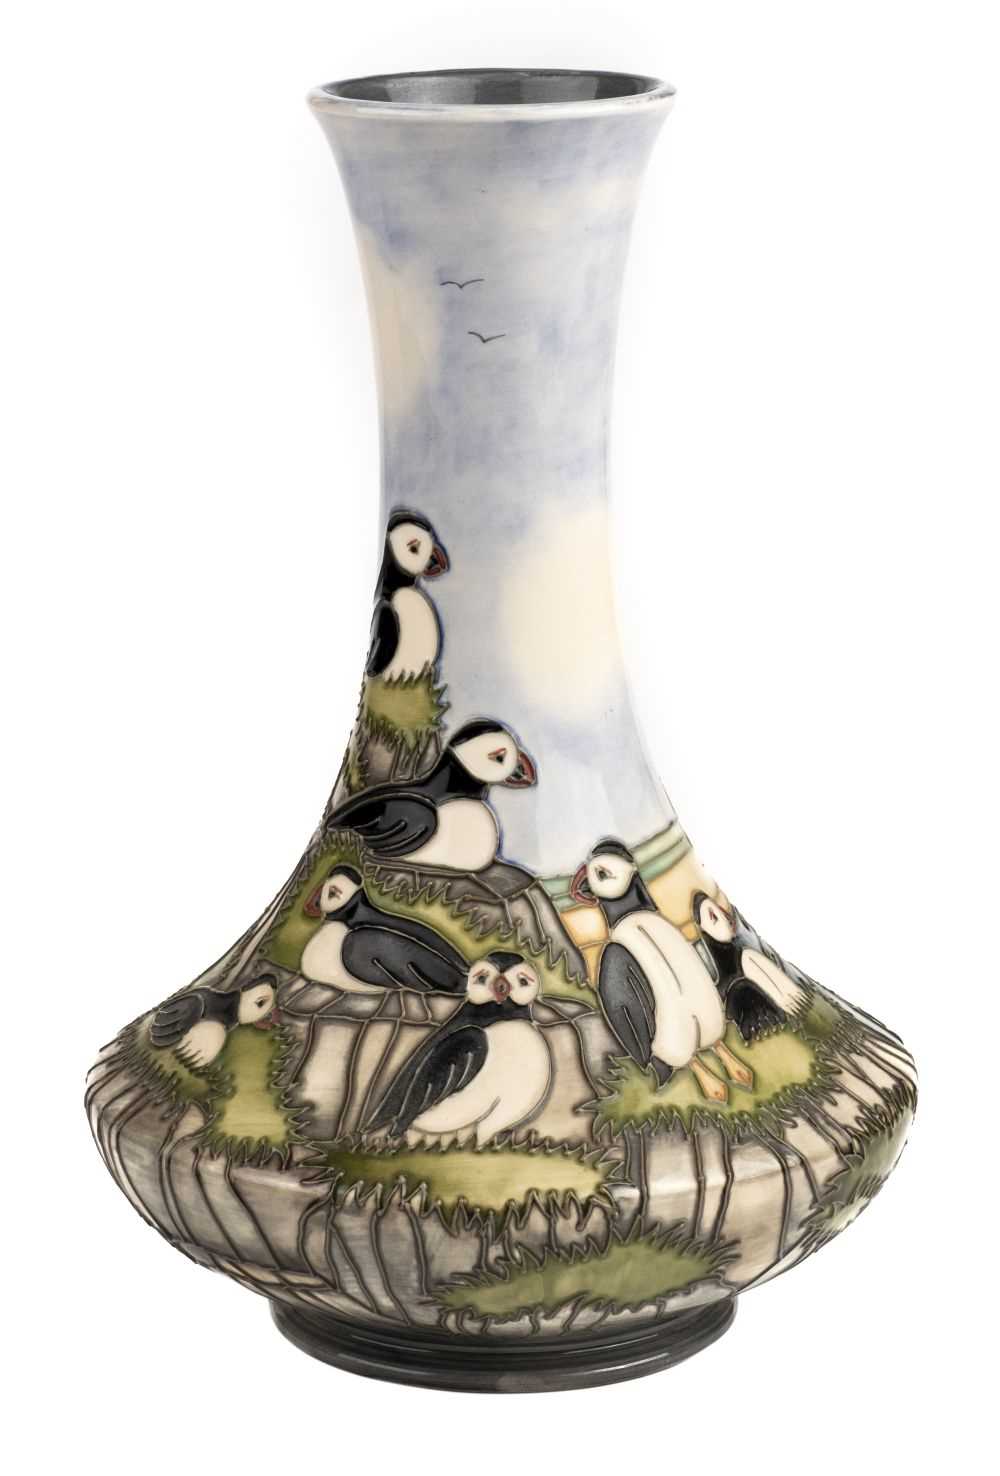 Lot 21 - Moorcroft. A Moorcroft pottery 'Puffin' pattern vase designed by Kerry Goodwin